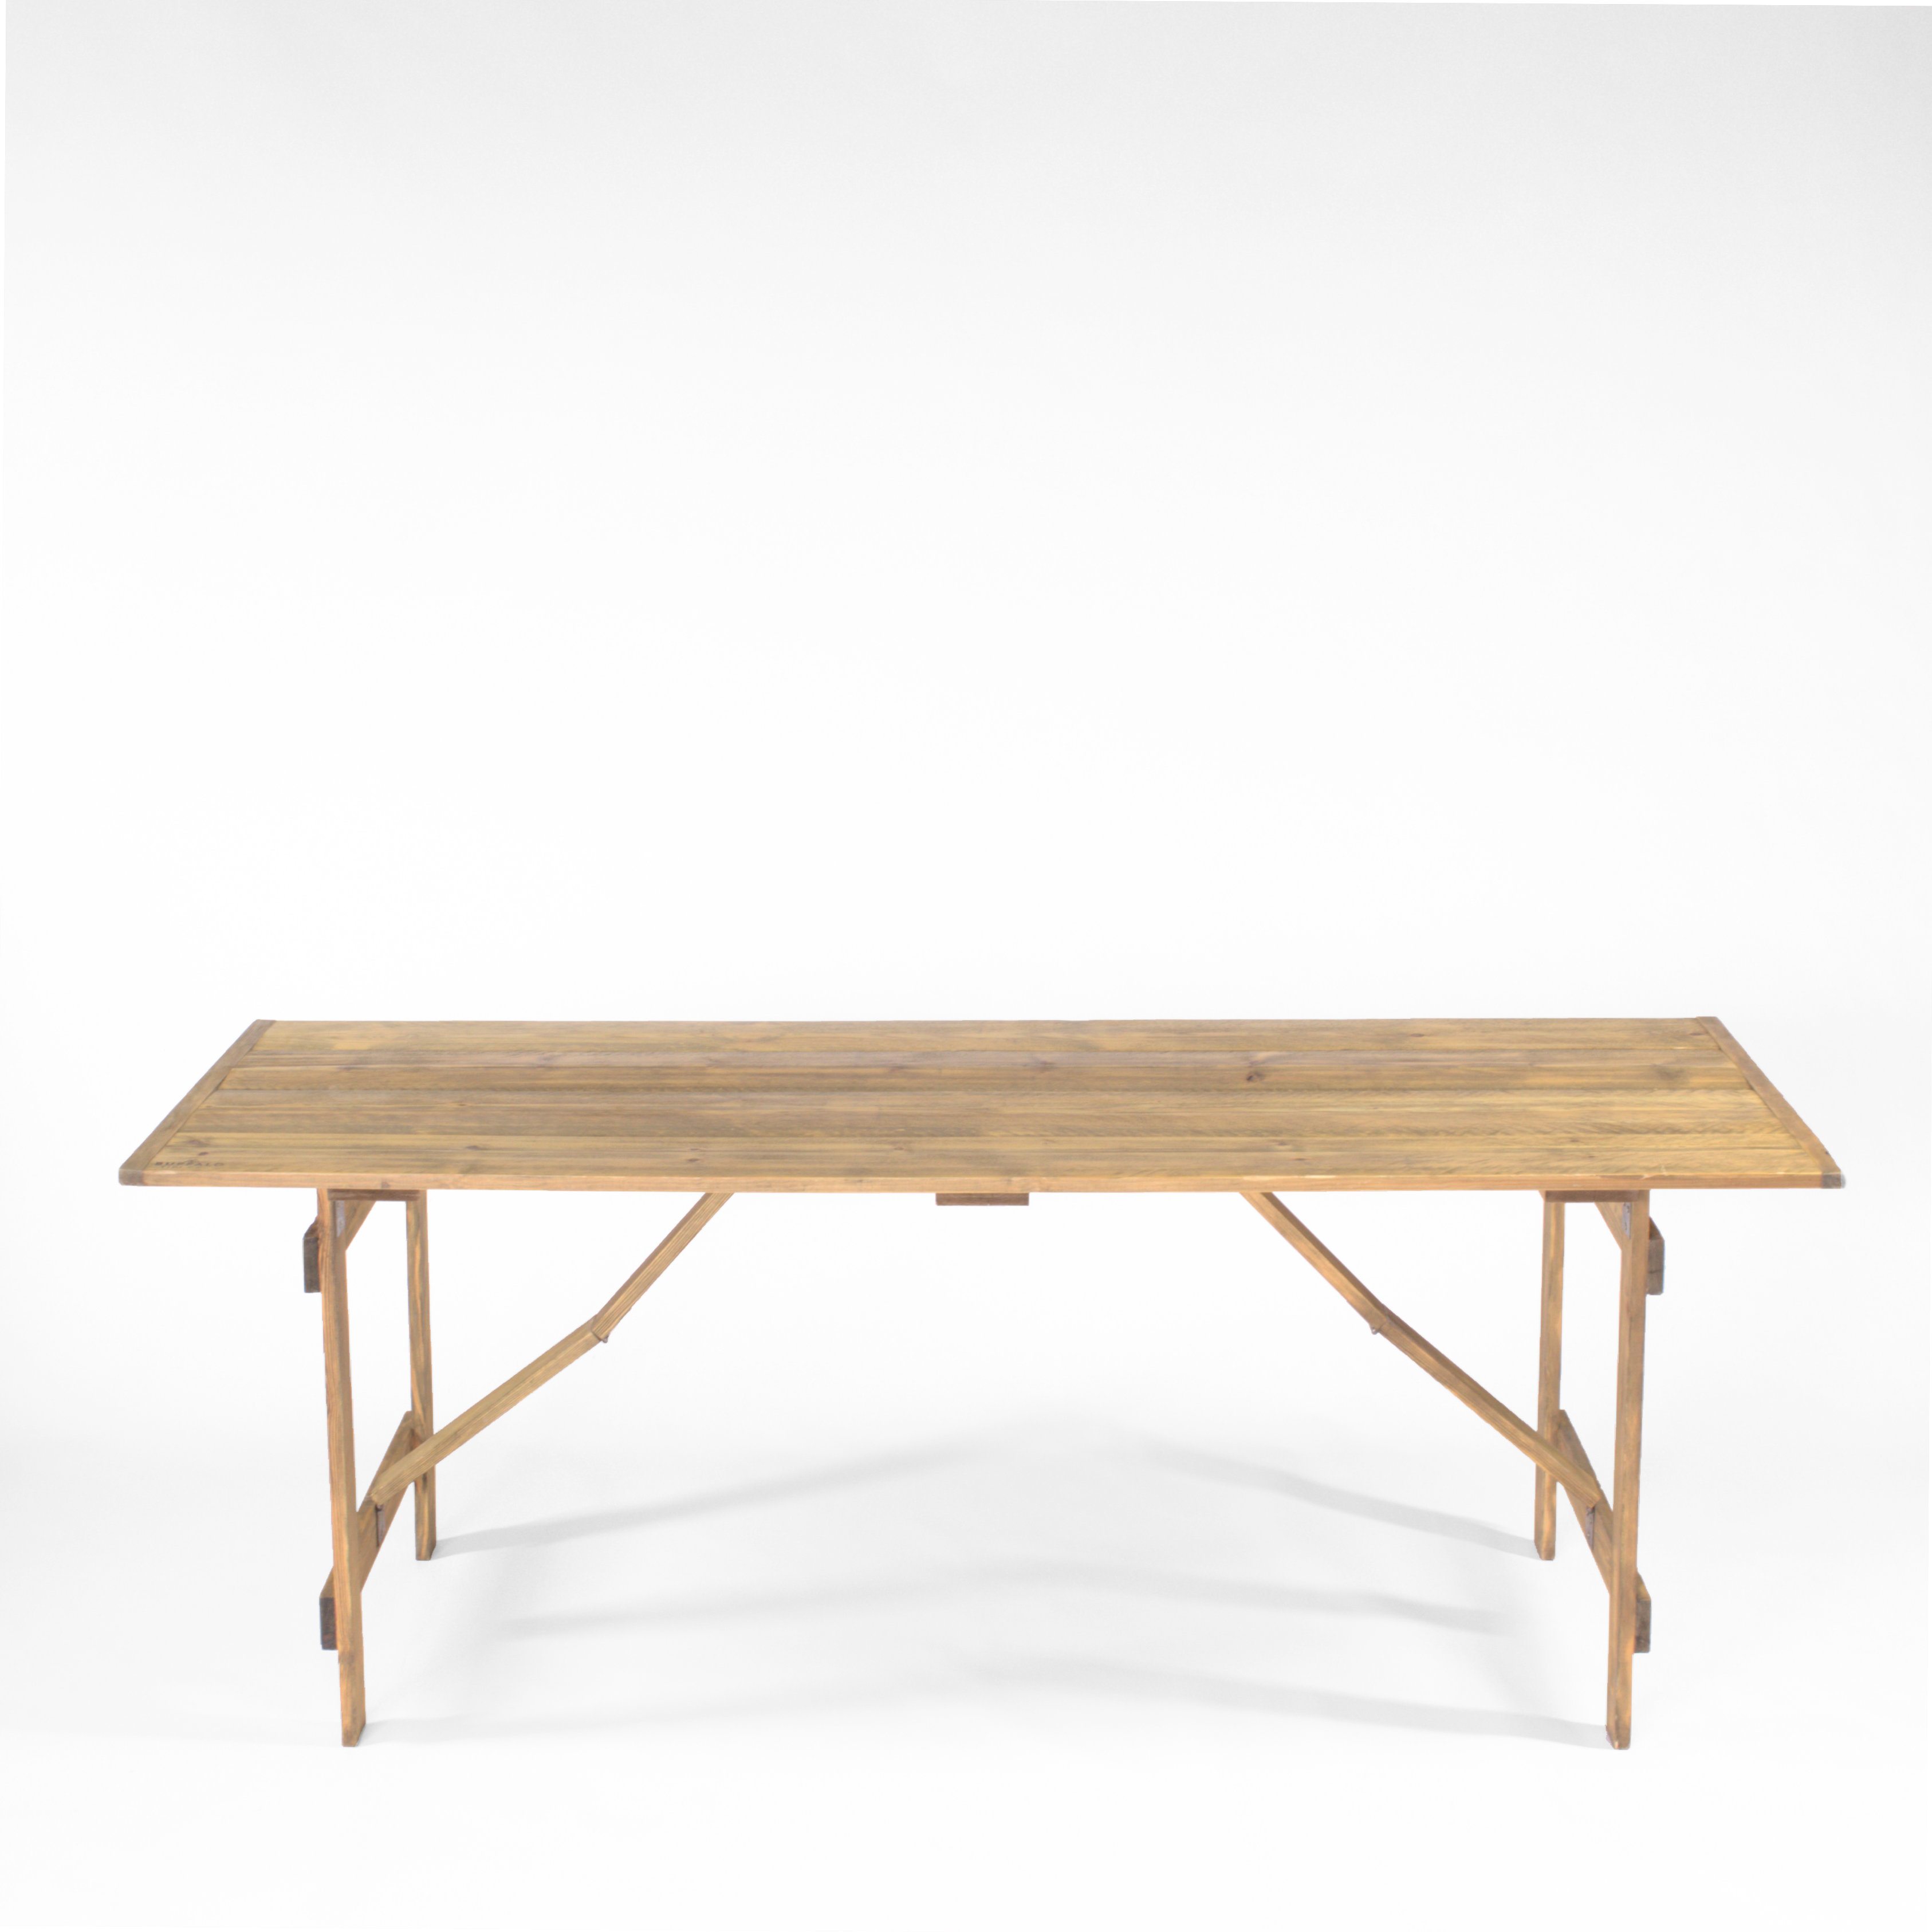 Timber trestle table